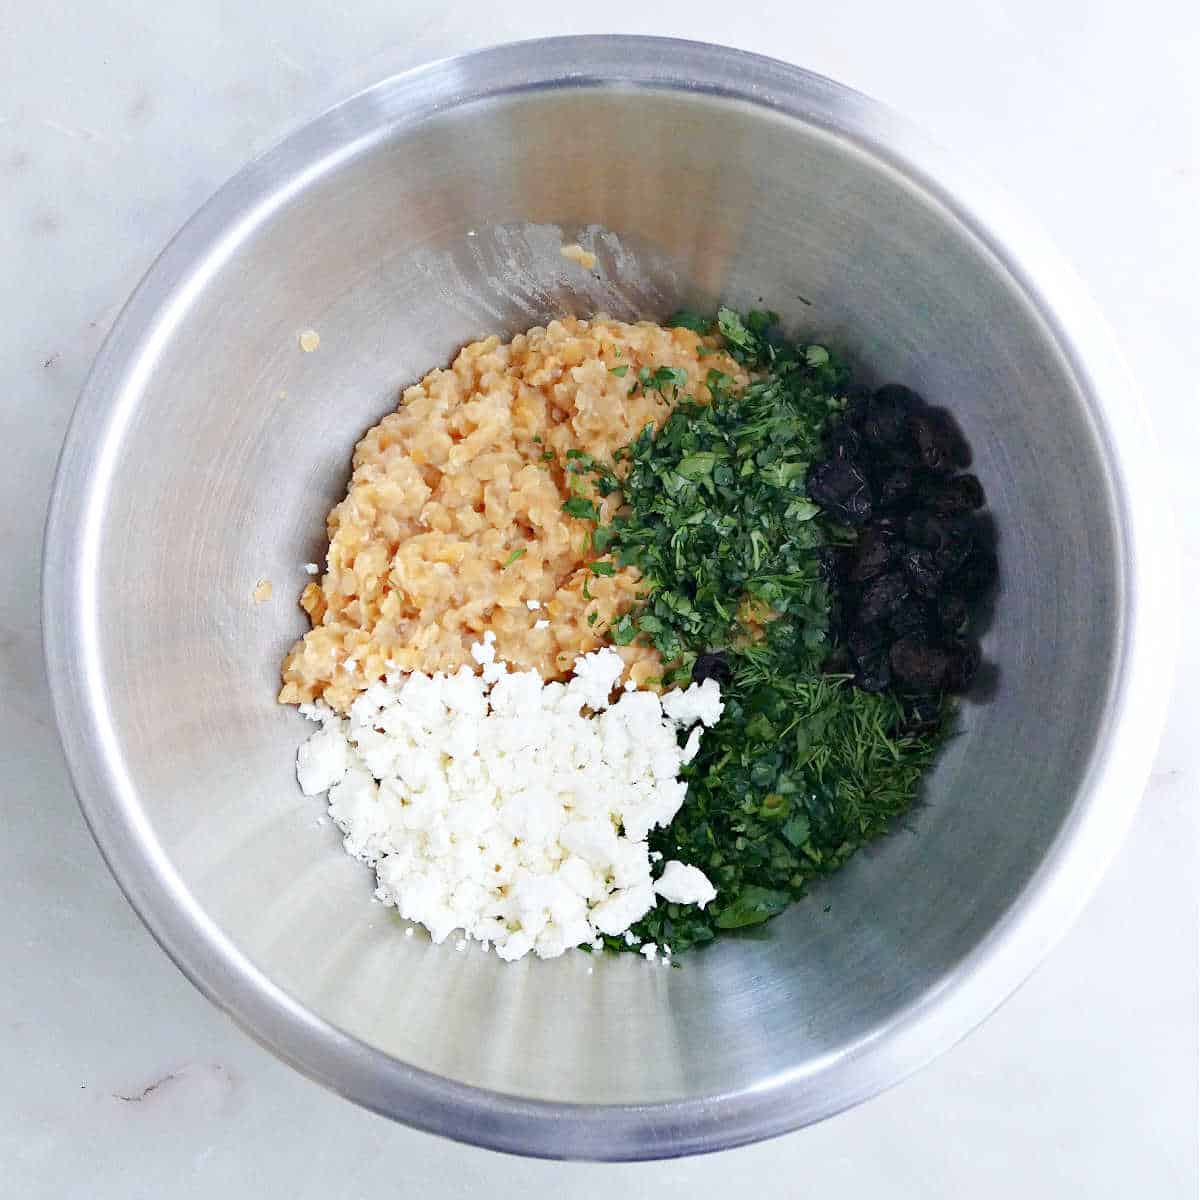 red lentils, feta cheese, herbs, and raisins in a mixing bowl